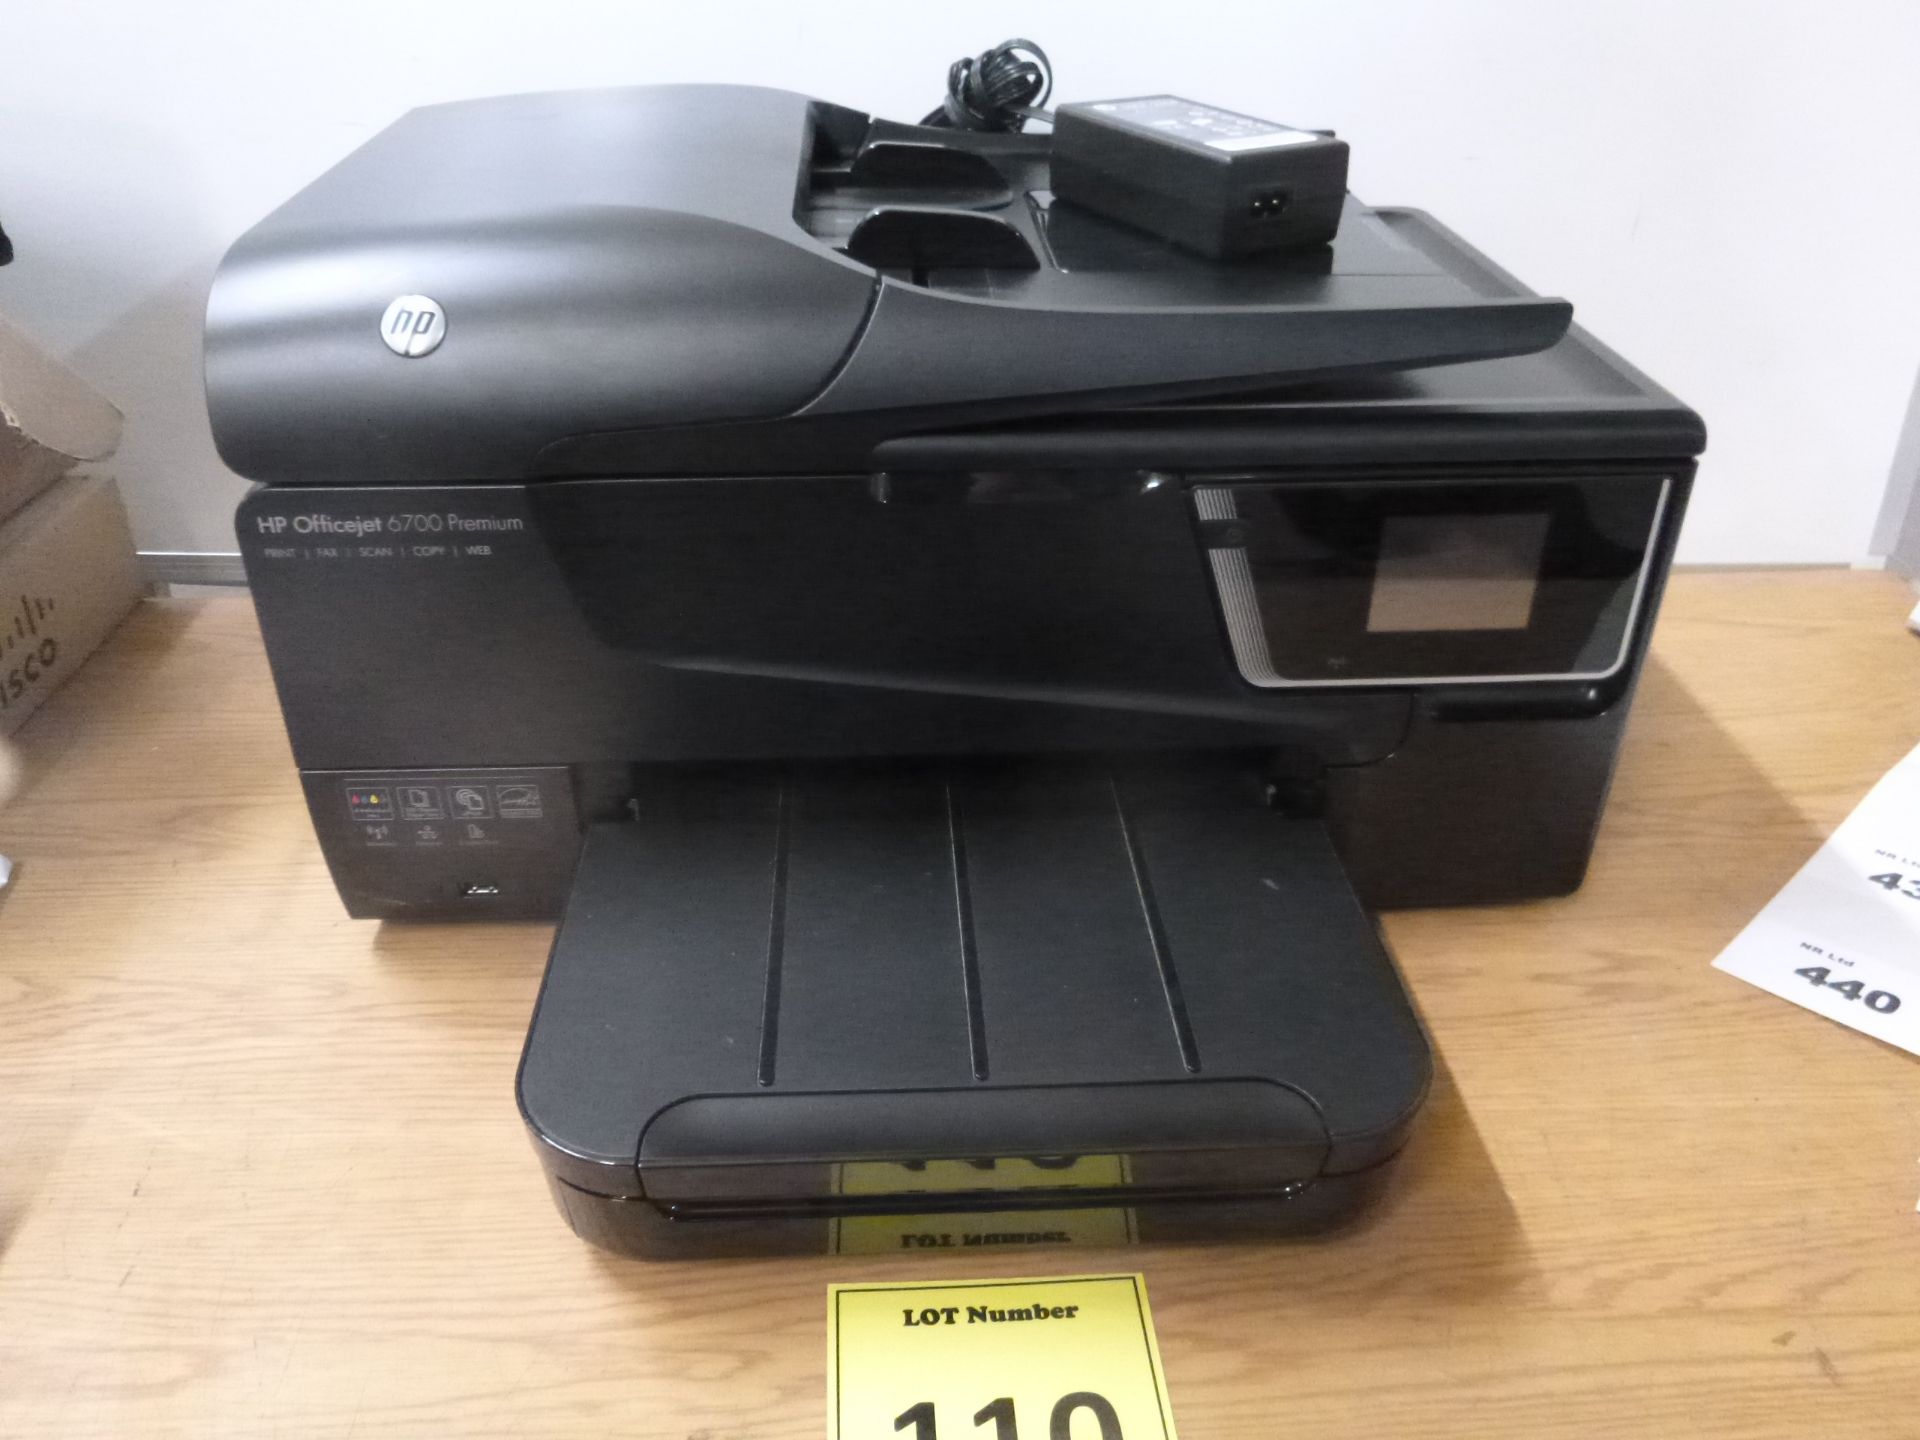 HP OFFICEJET 6700 PREMIUM COLOUR MULTIFUNCTION PRINTER, PRINT/FAX/SCAN/COPY/WEB. WITH PSU AND TEST